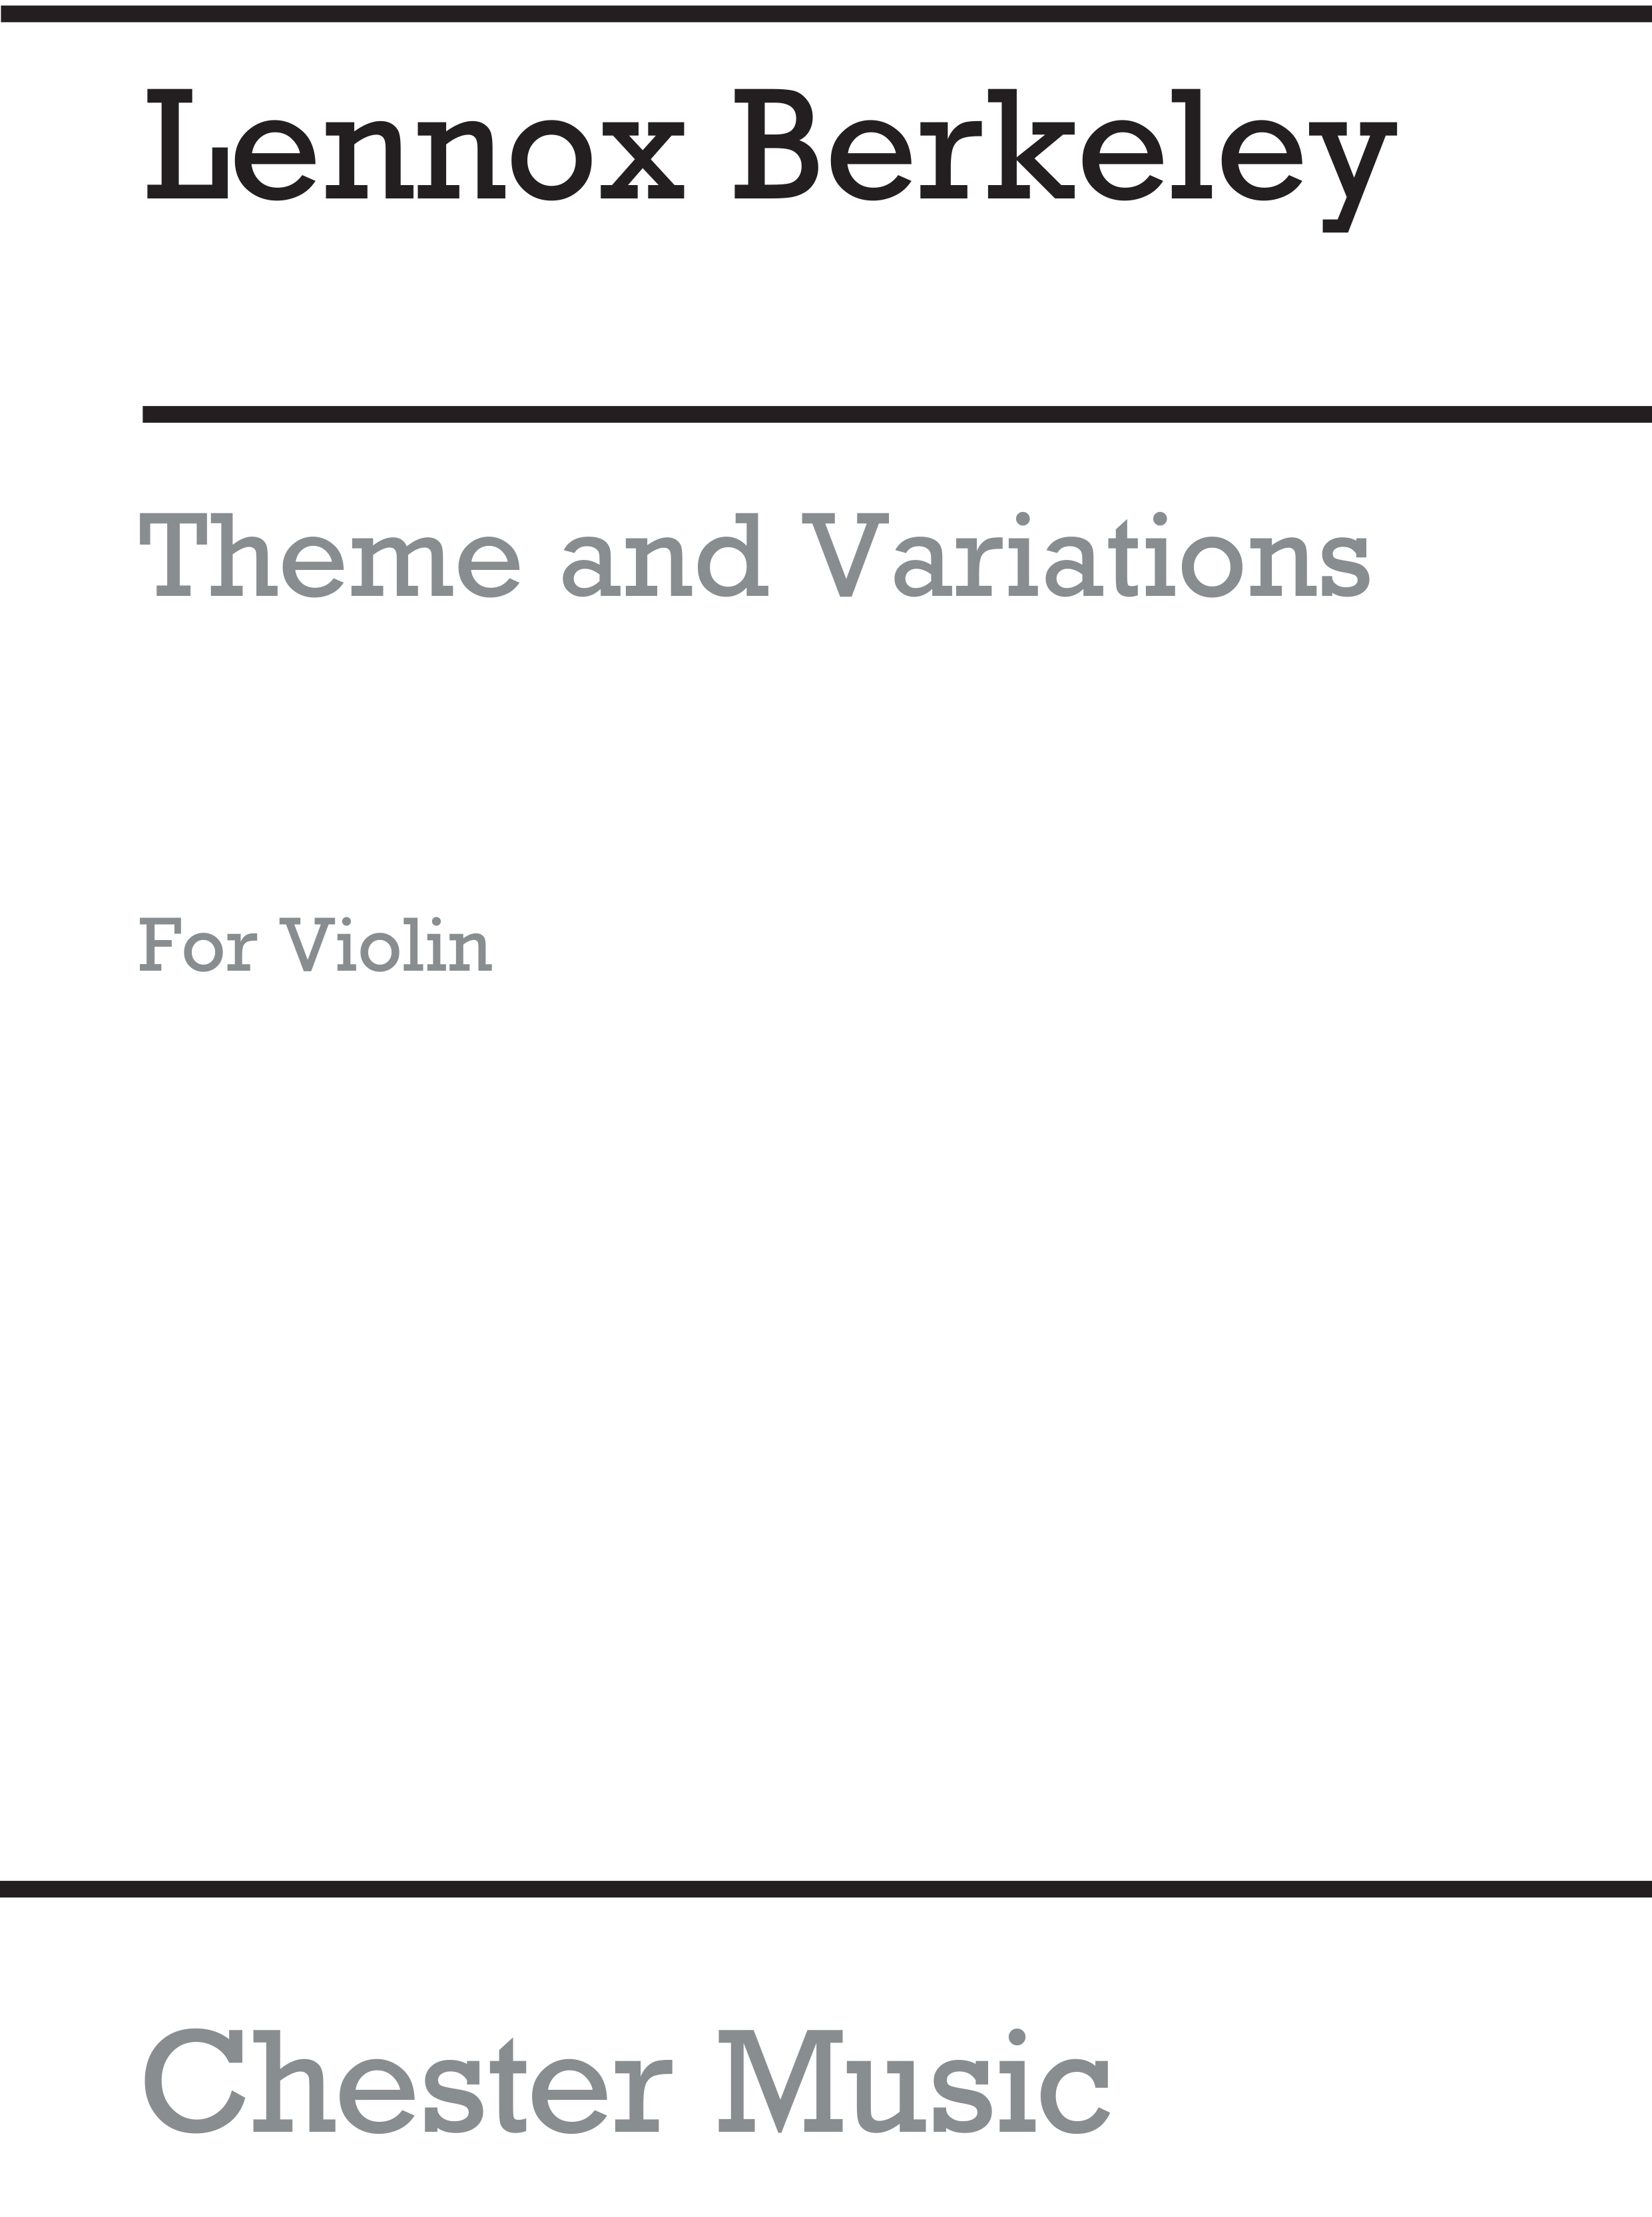 Lennox Berkeley: Theme And Variations Op. 33 No.1 for Solo Violin: Violin: